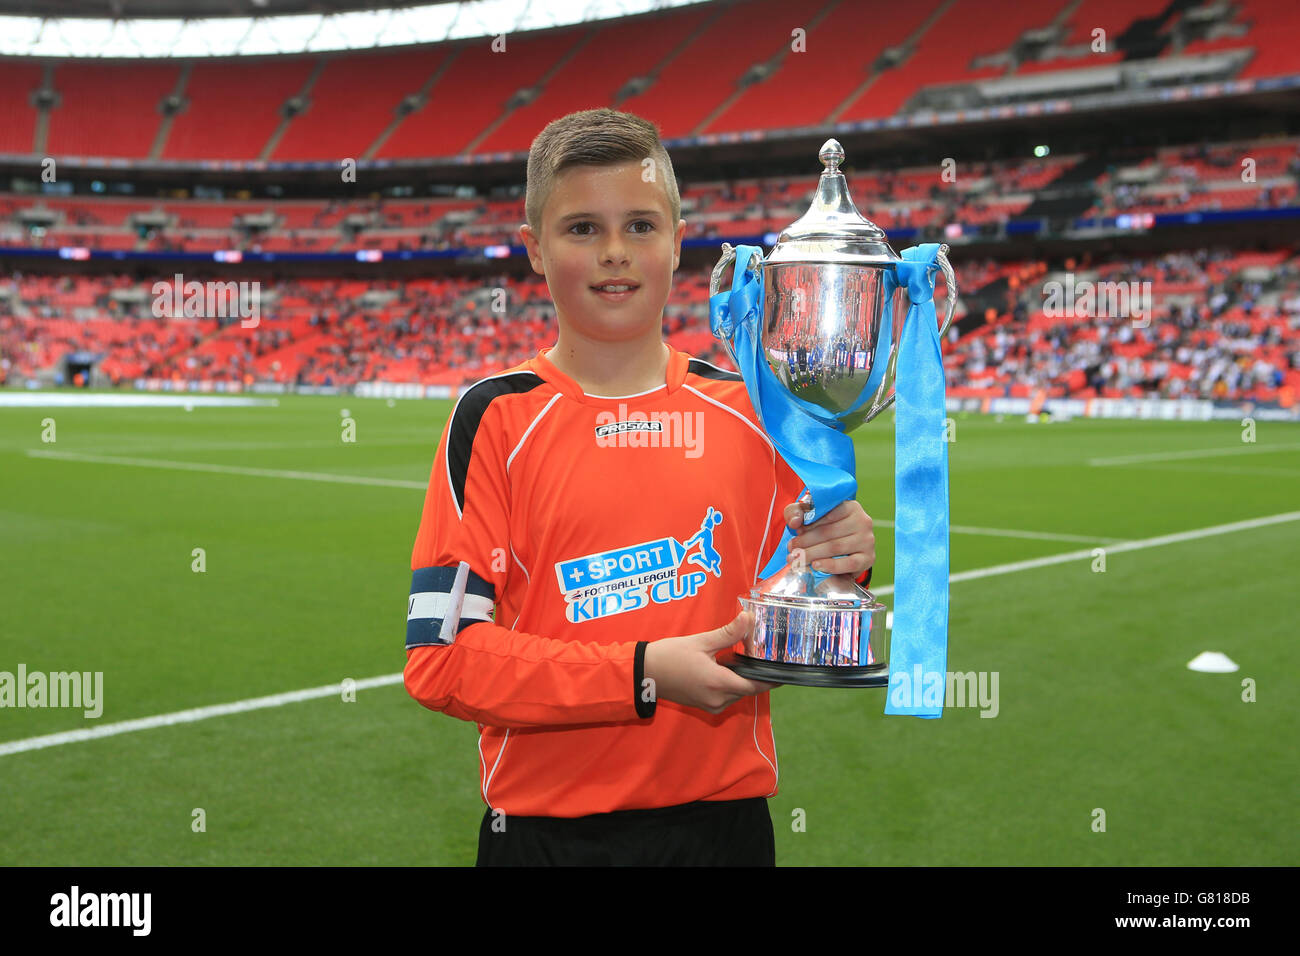 Oldham Athletic's captain represented by South Failsworth Primary school holds the trophy for winning the Kinder+Sport Kids Cup Final. Stock Photo